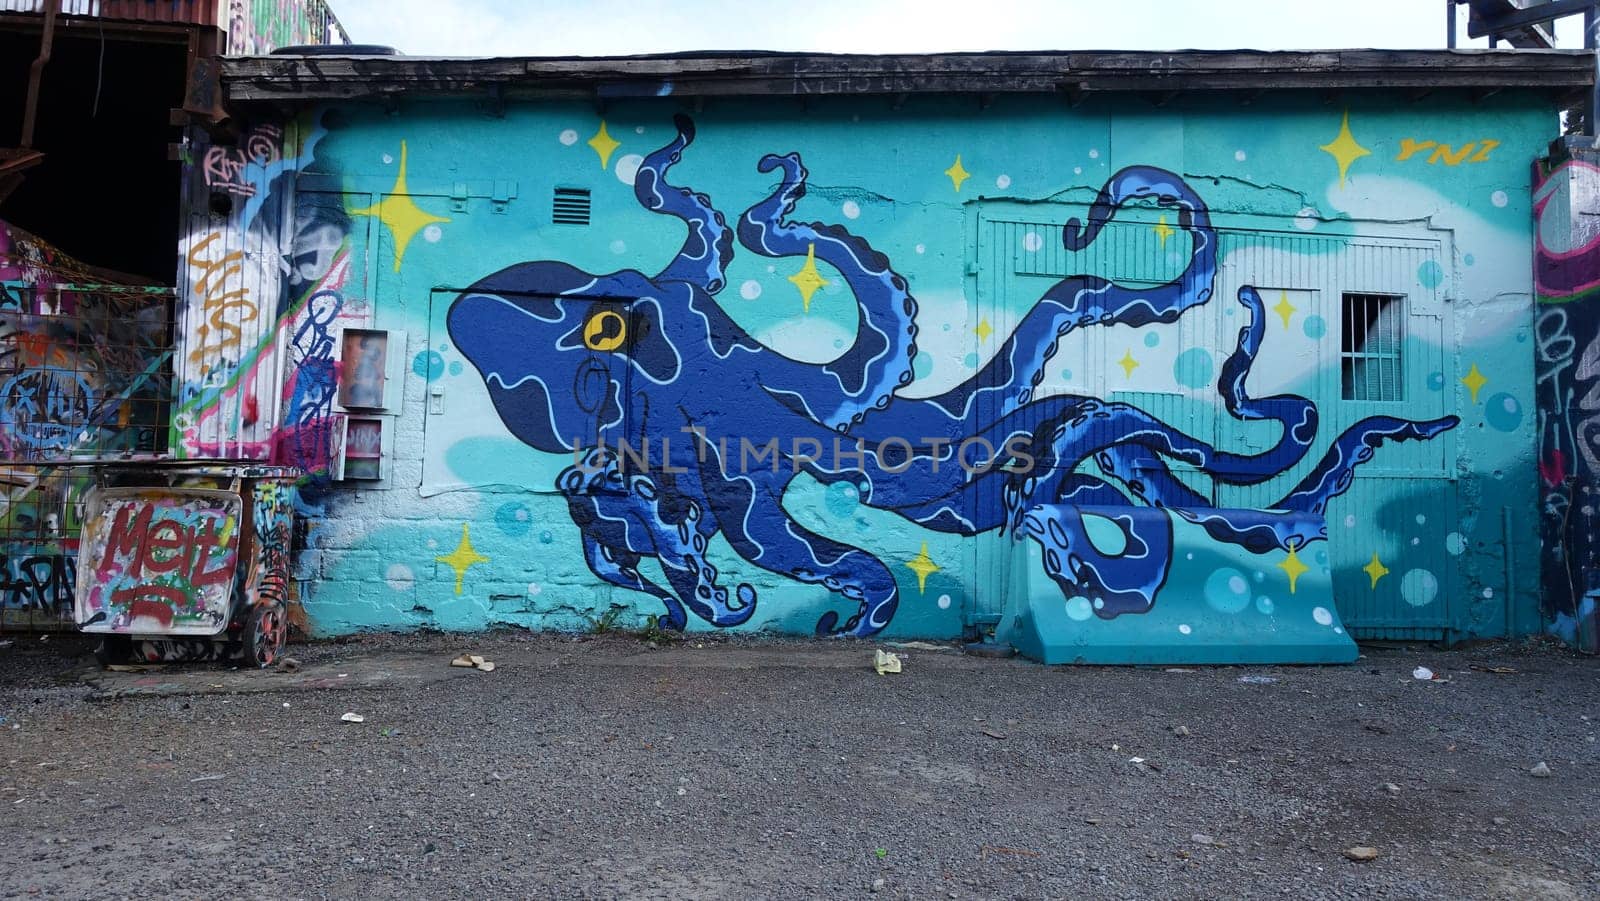 Stockholm, Snosatra, Sweden, May 23 2021. Graffiti exhibition on the outskirts of the city. Octopus.